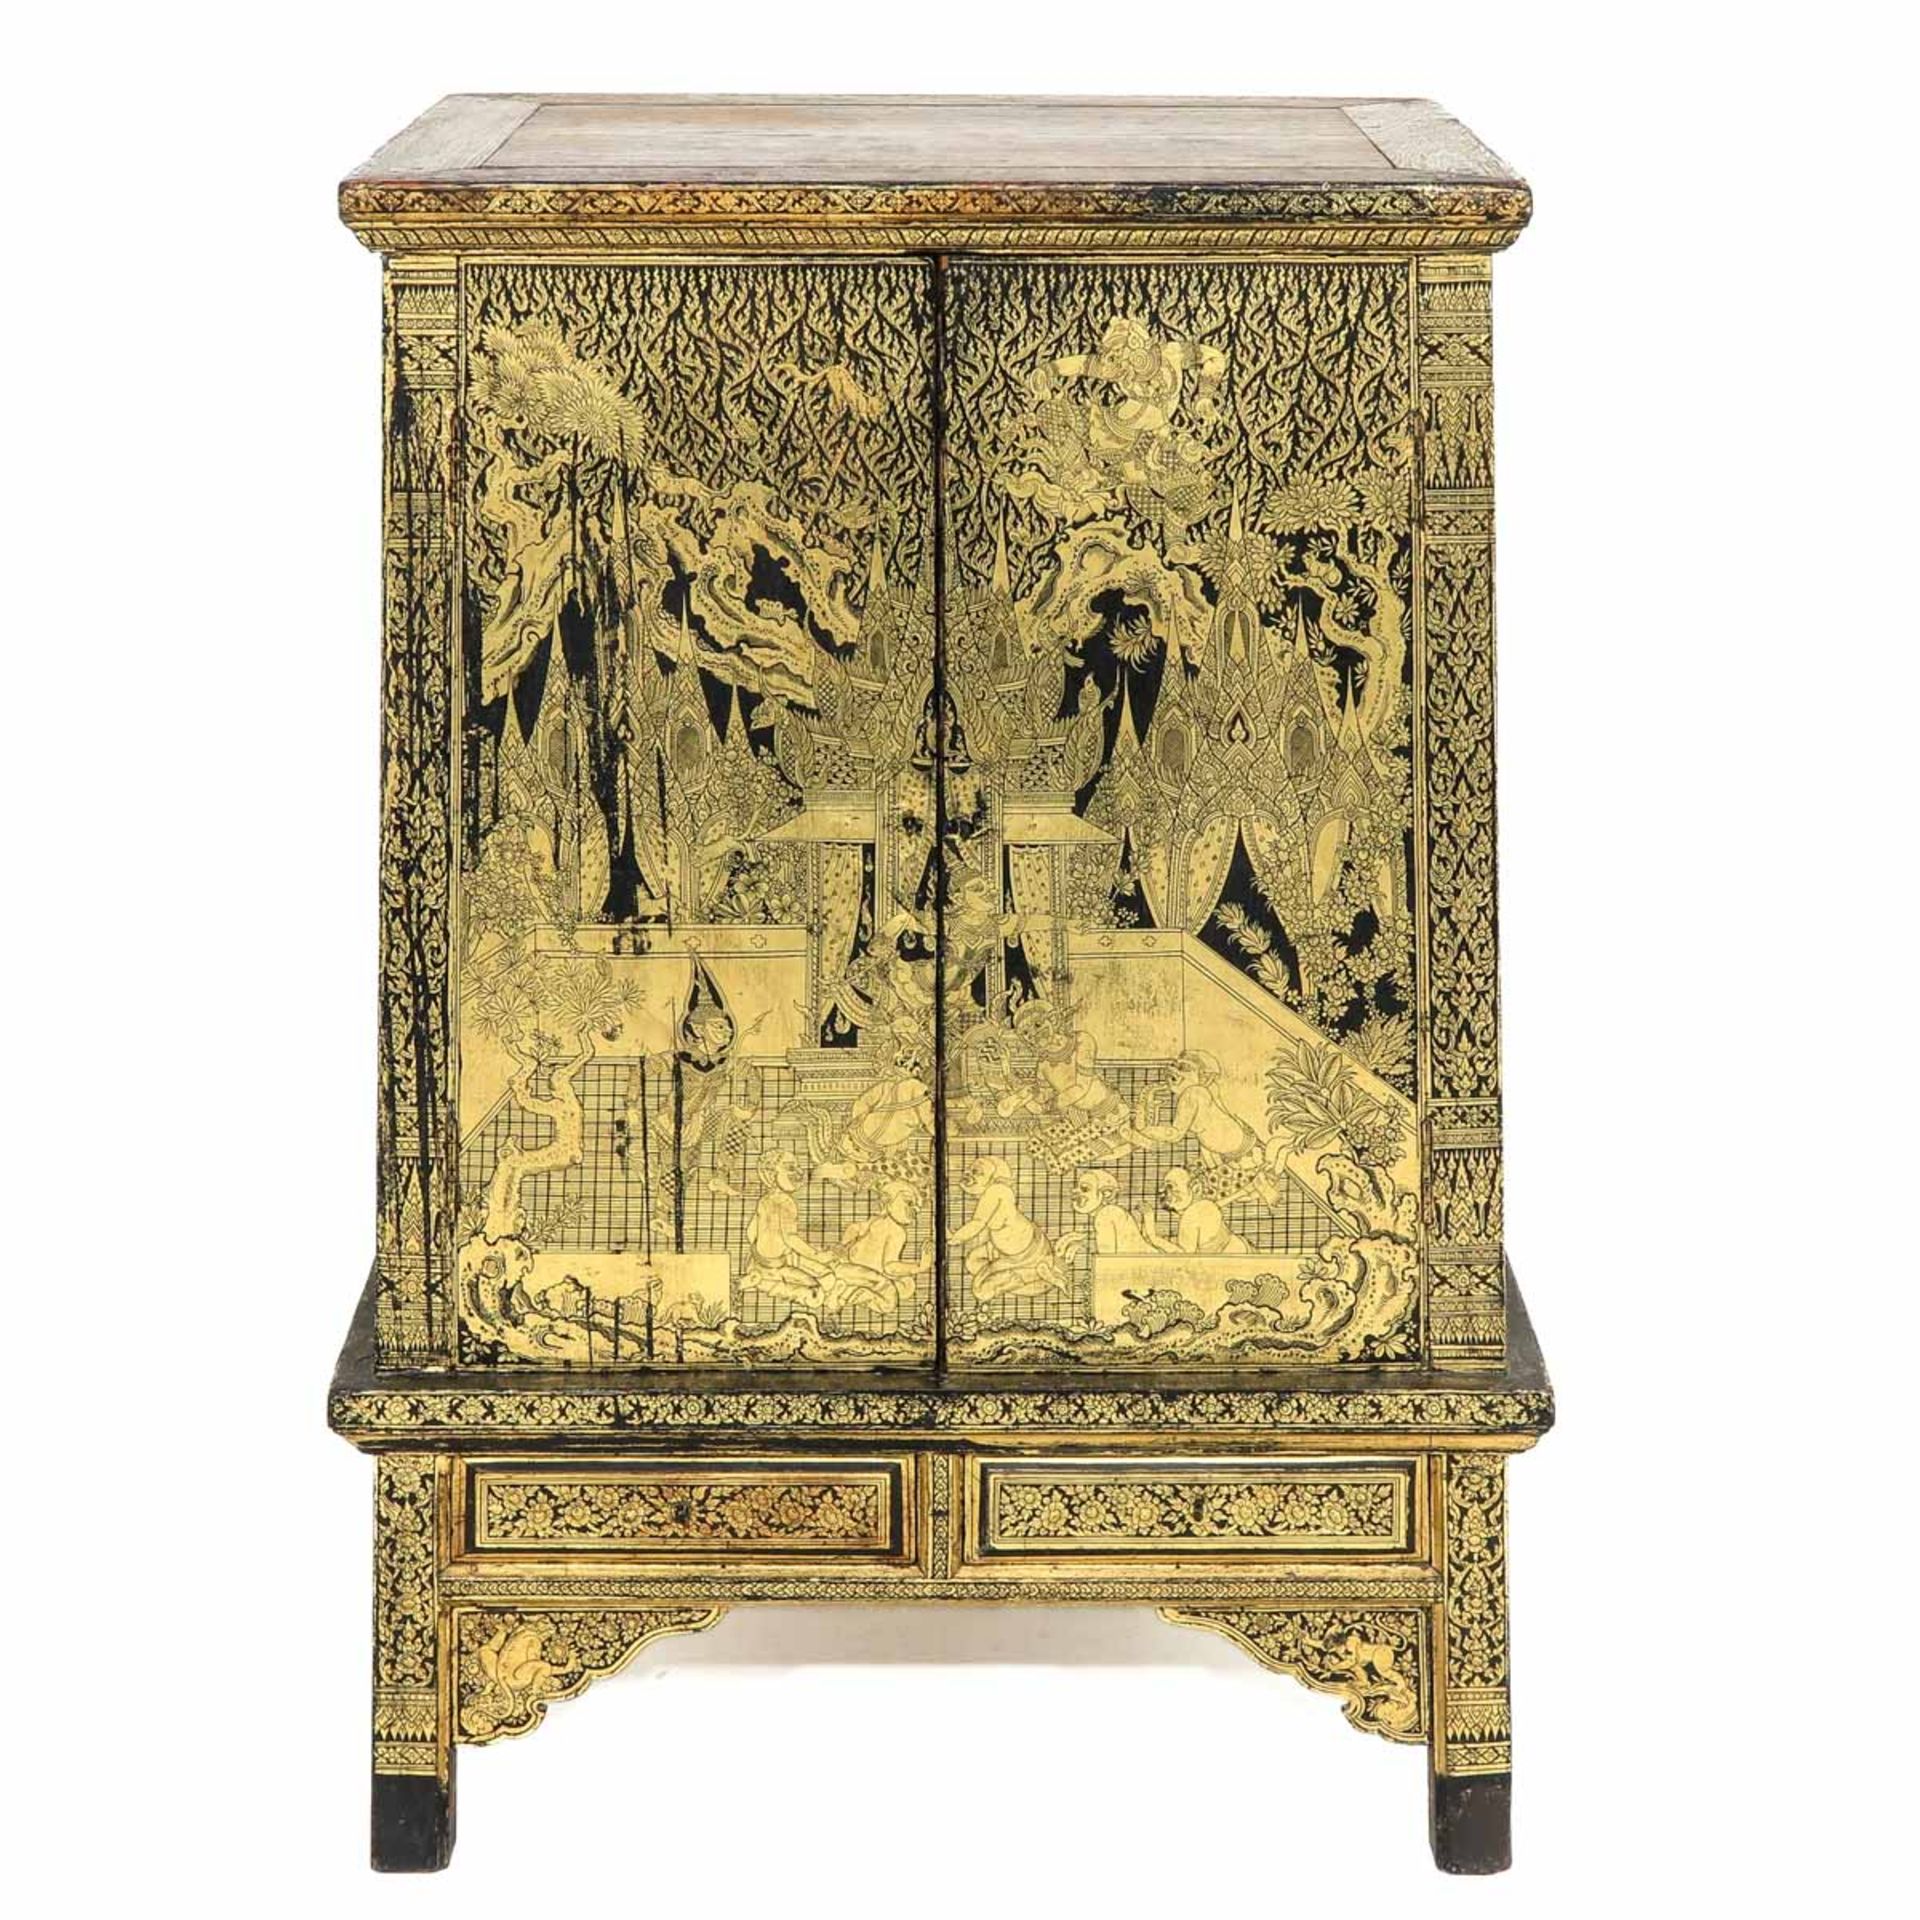 A 19th Century Cabinet from Thailand